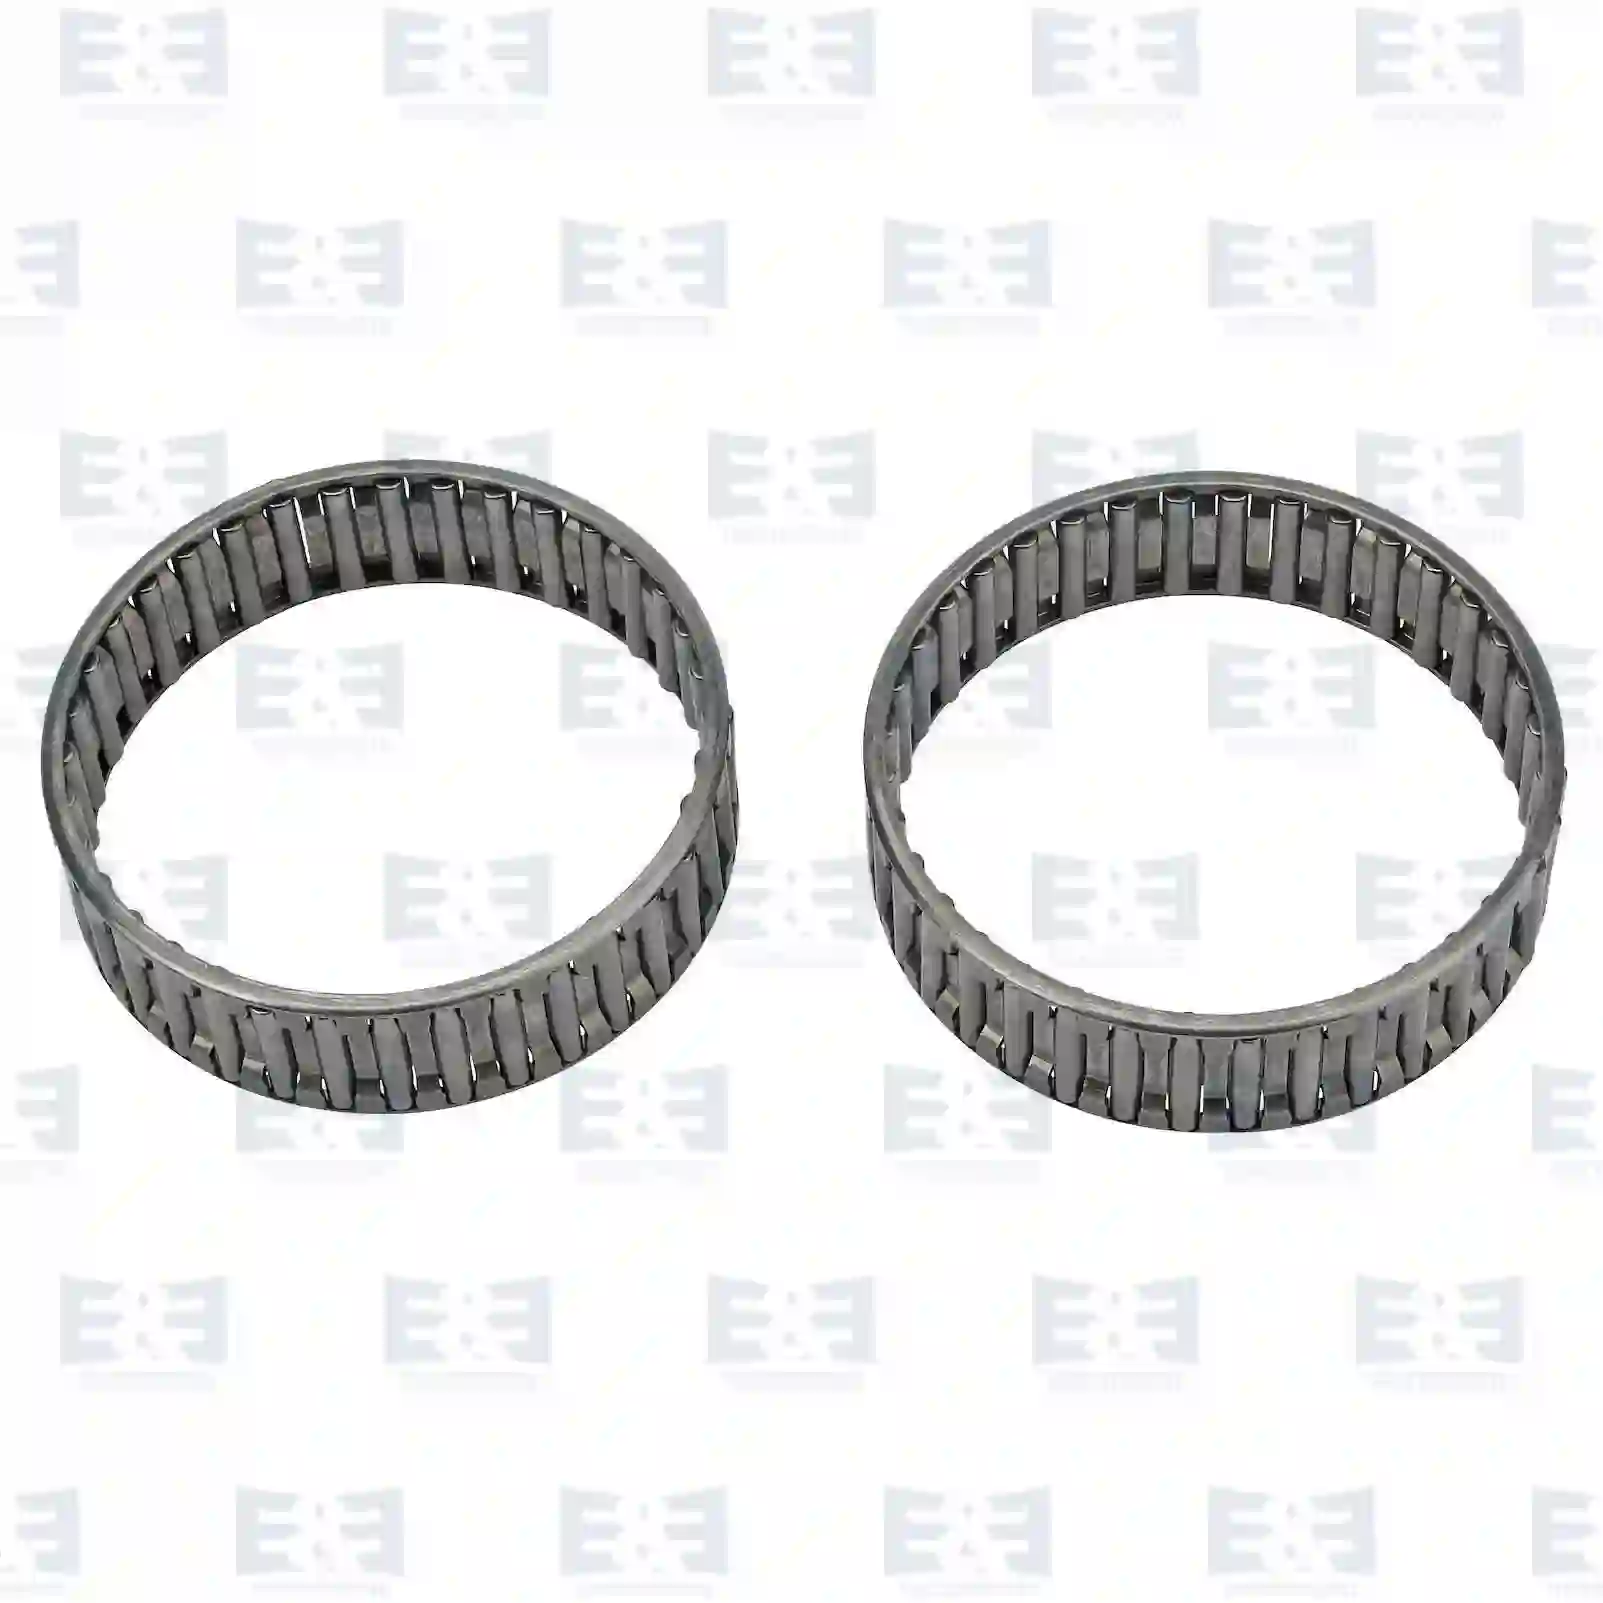  Needle bearing kit || E&E Truck Spare Parts | Truck Spare Parts, Auotomotive Spare Parts